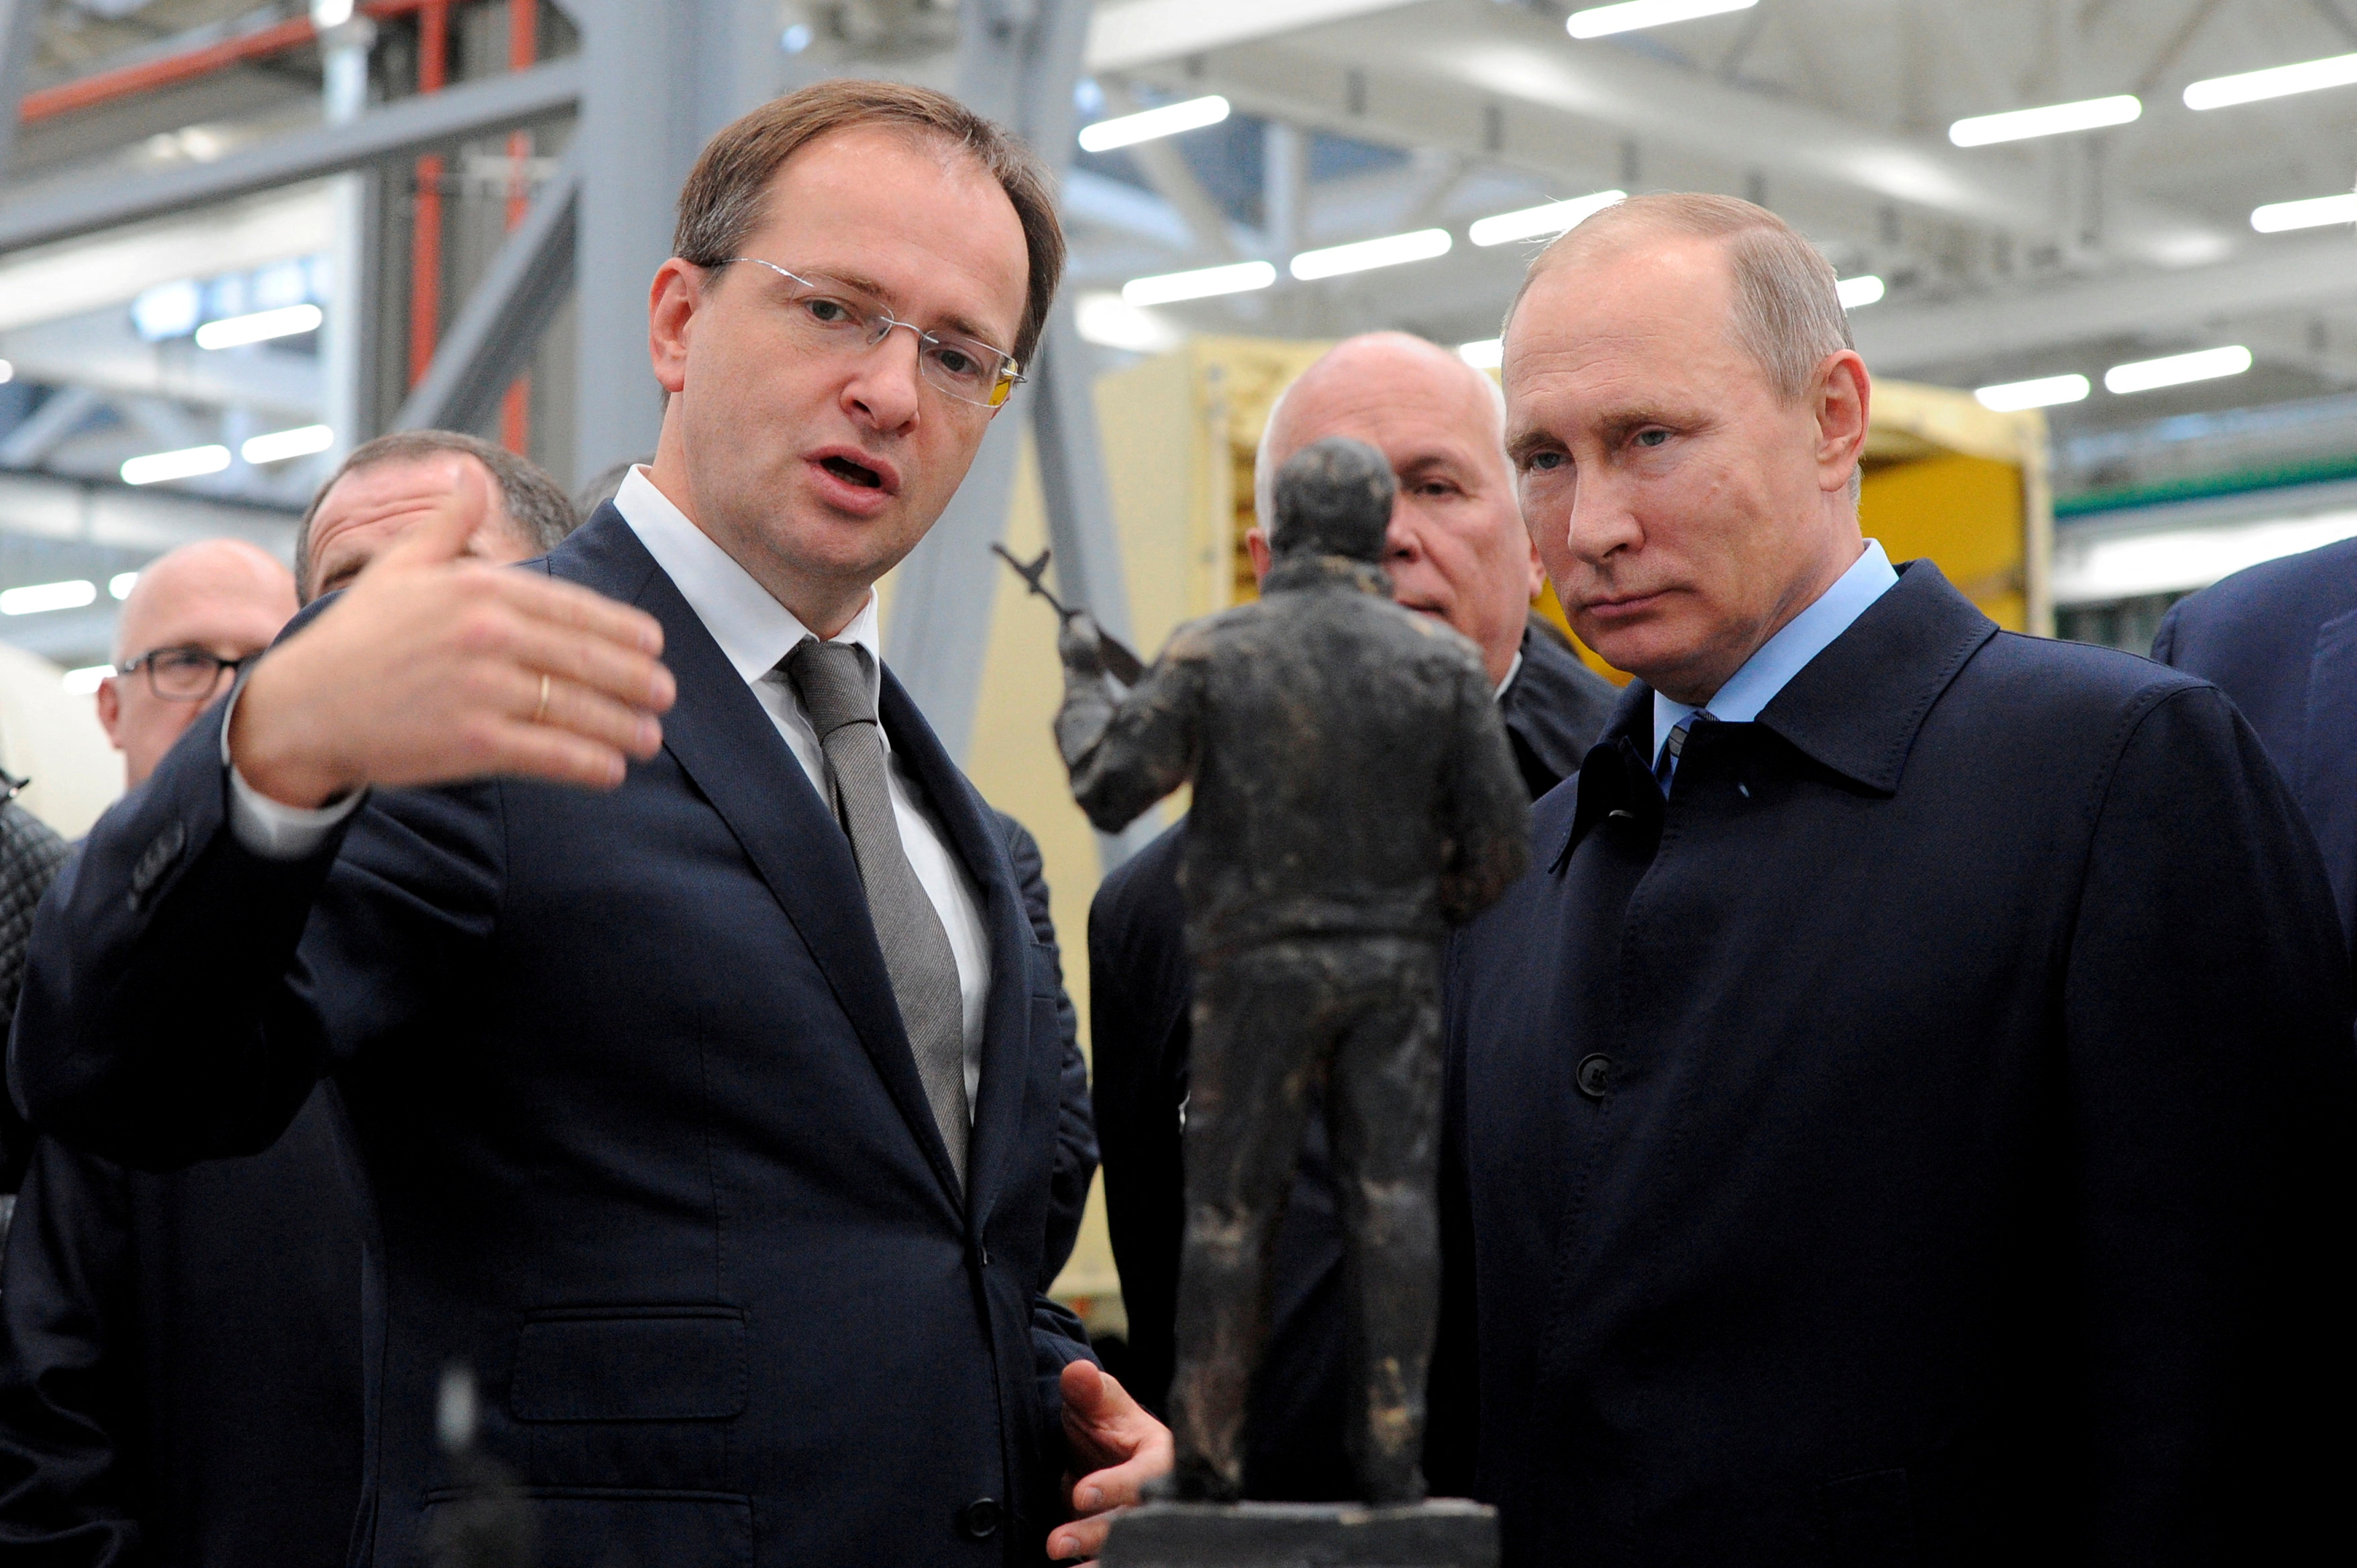 Russian President Putin listens to Culture Minister Medinsky as they watch the project of a monument to Kalashnikov, the Russian inventor of the AK-47 assault rifle, during a visit at firearms maker Kalashnikov Concern in Izhevsk, Russia